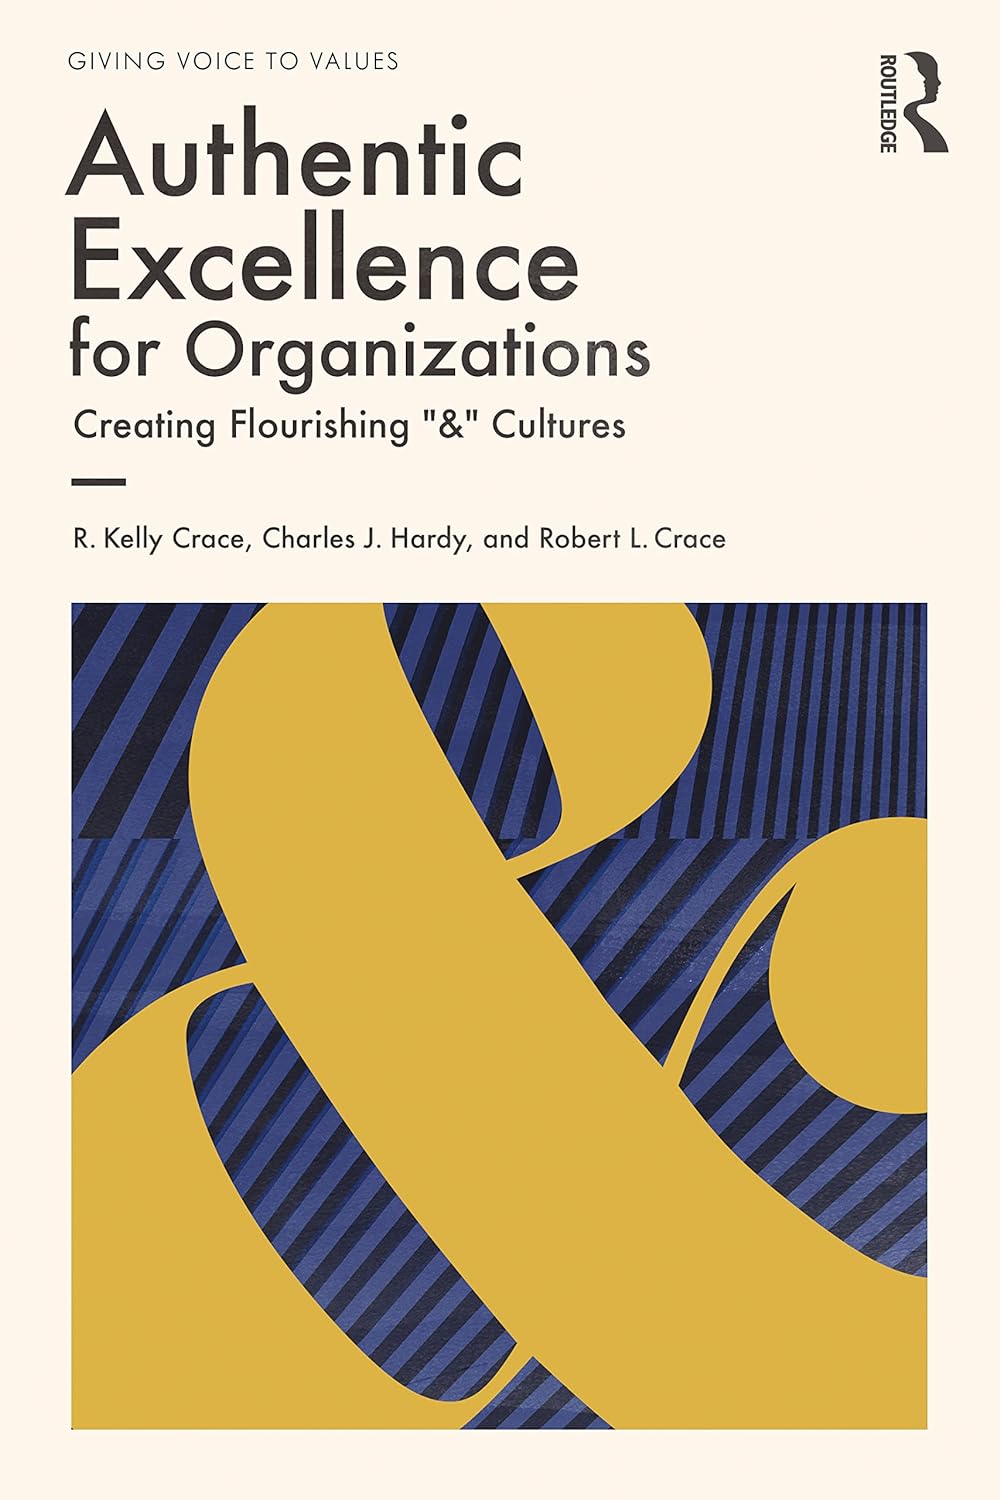 Authentic Excellence for Organizations [Book Cover]